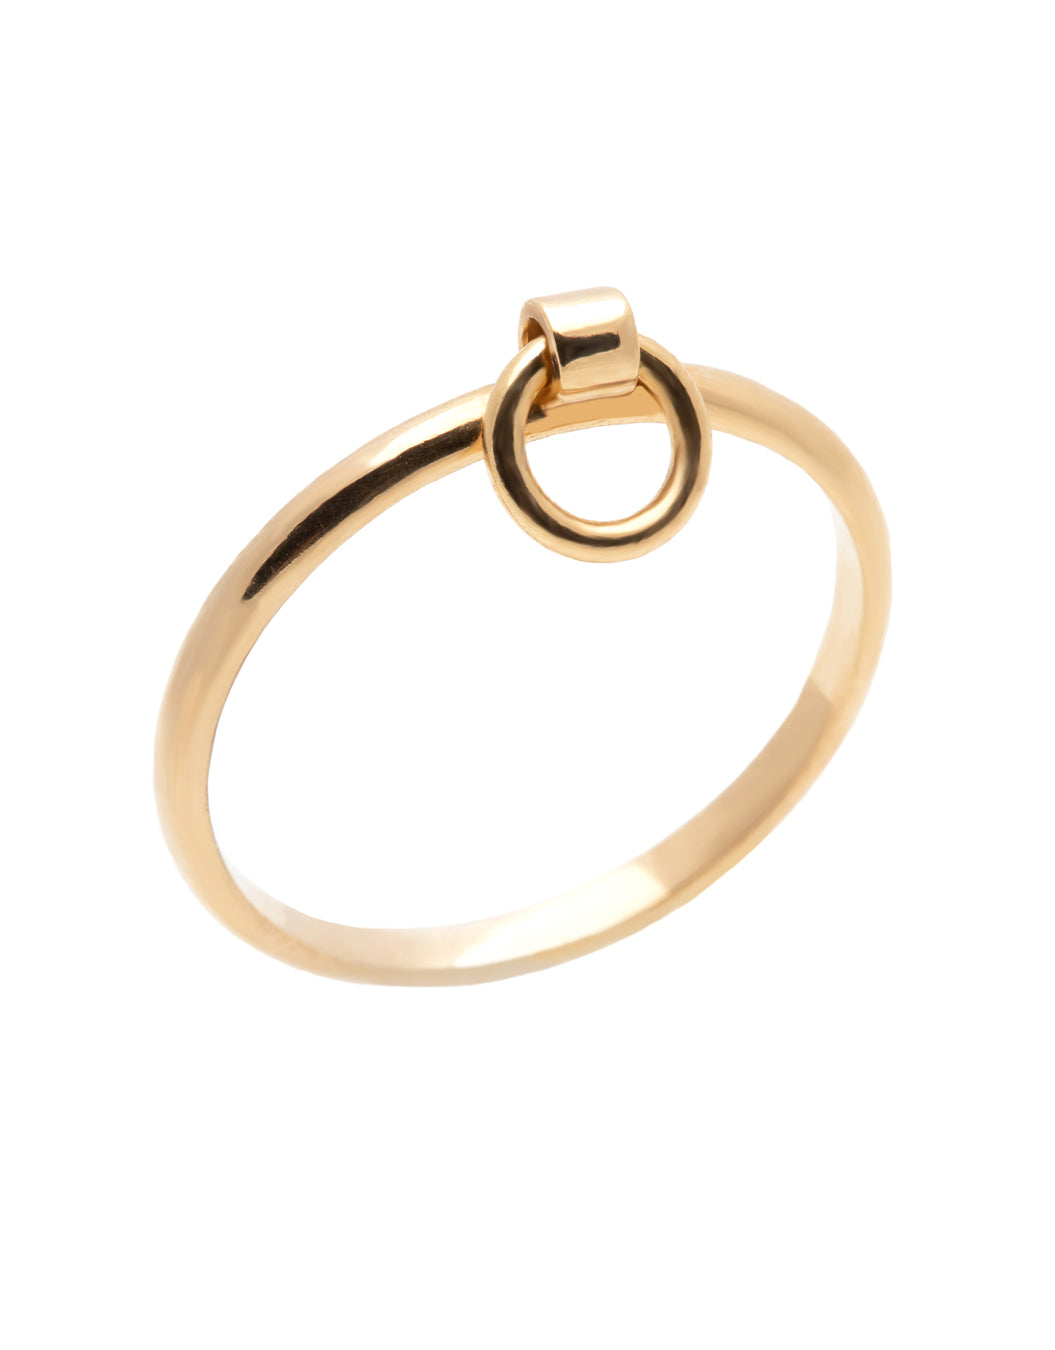 A dainty 14k yellow gold ring, with a hanging hoop.  